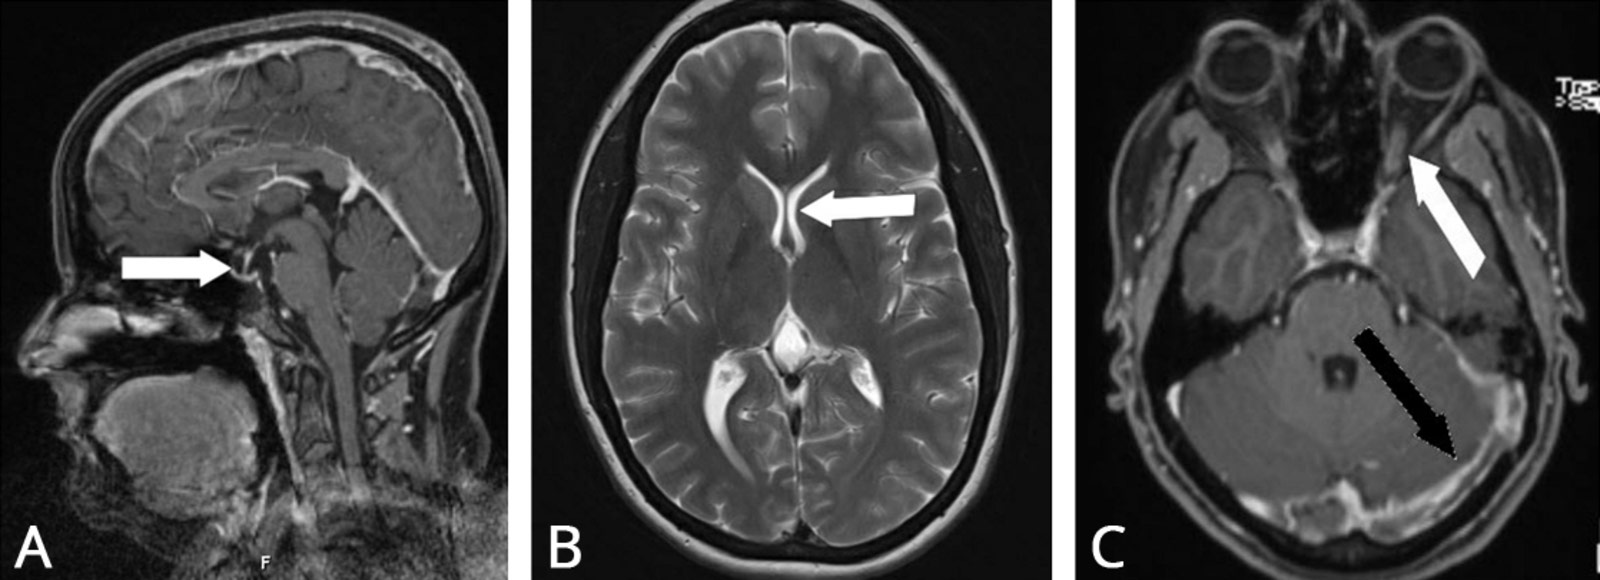 Three MRI images of idiopathic intracranial hypertension with varying degrees of severity